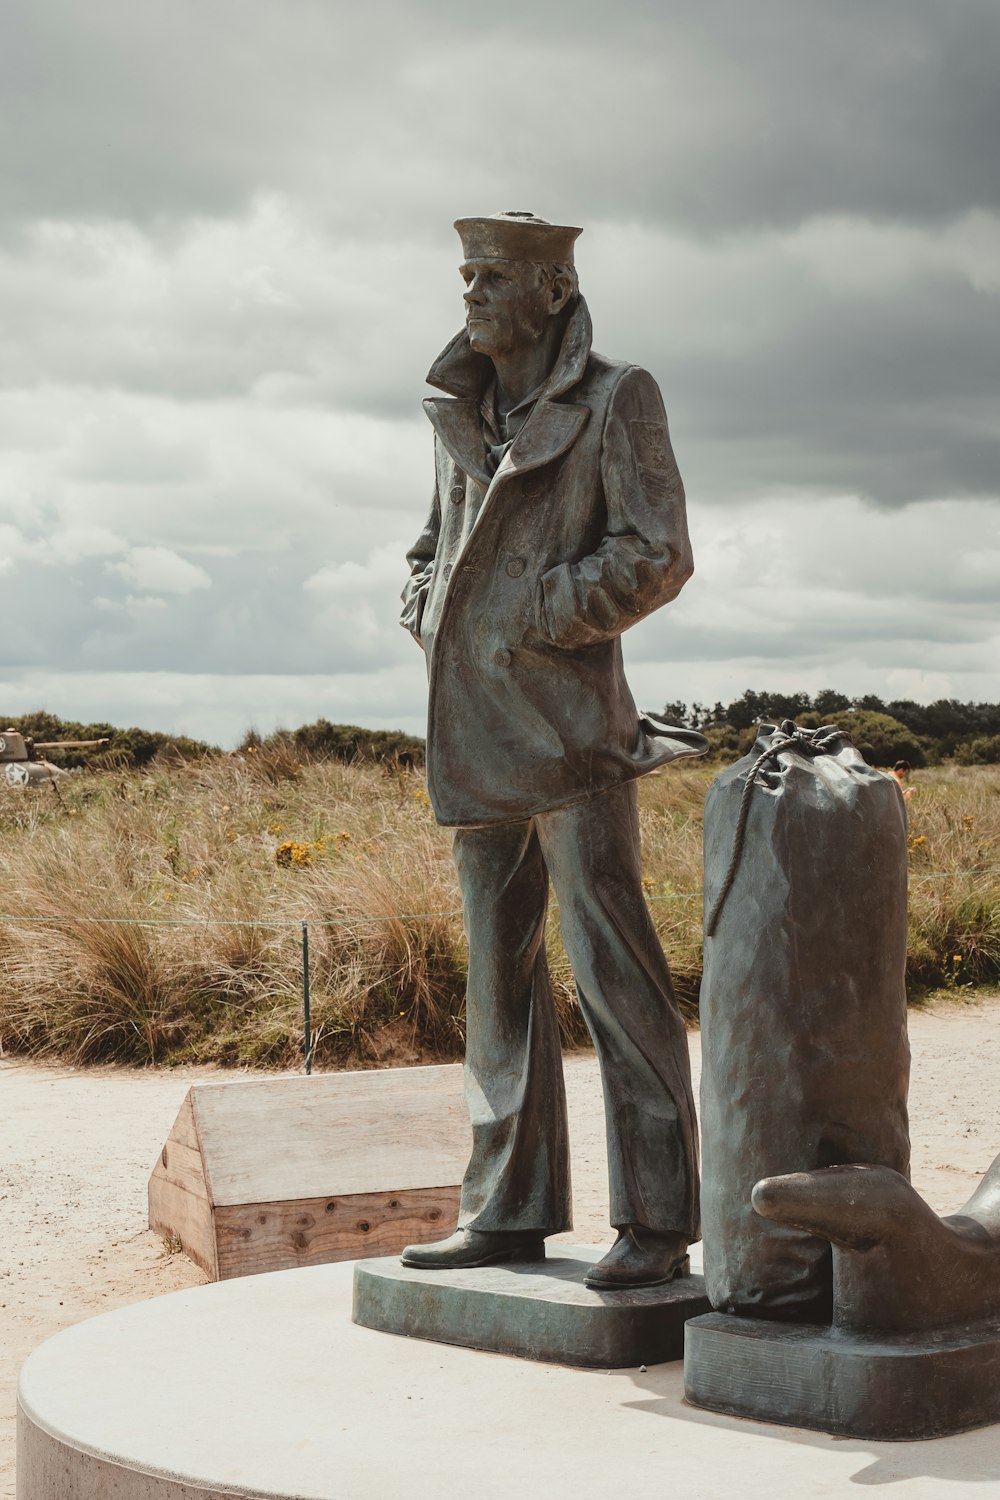 a statue of a man holding a suitcase